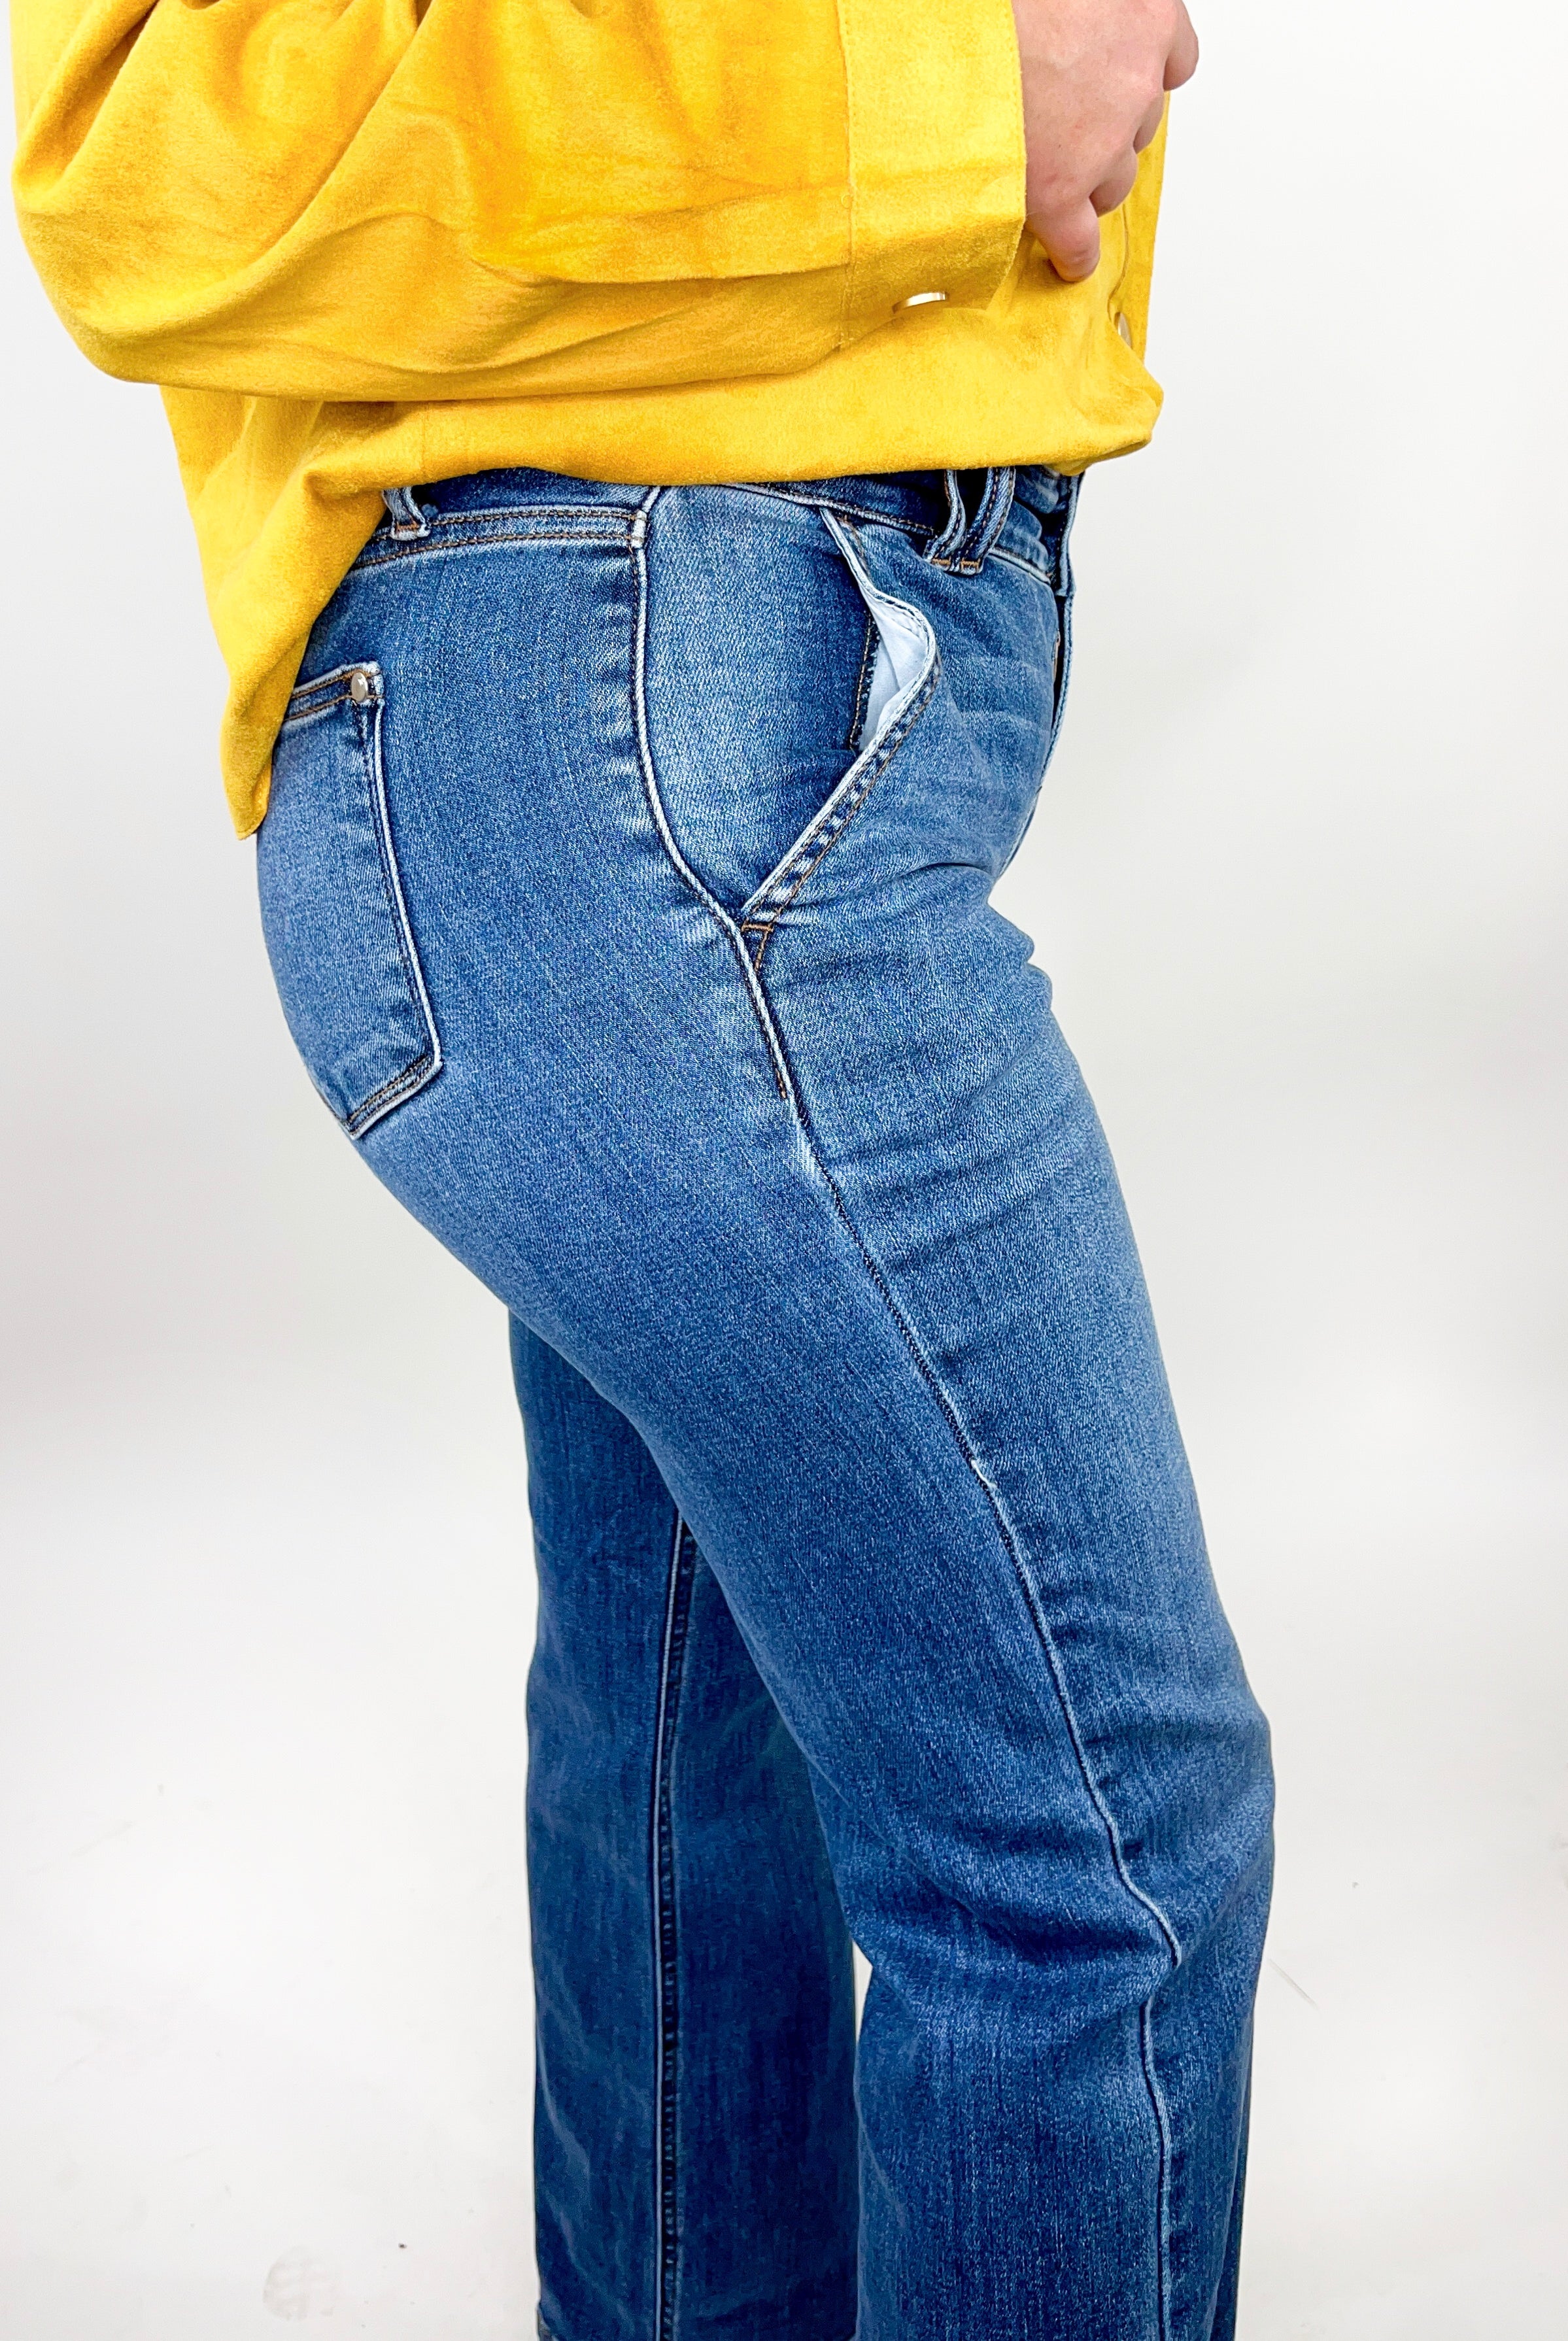 RESTOCK: Double Trouble Trouser Wide Leg Jean by Judy Blue-190 Jeans-Judy Blue-Heathered Boho Boutique, Women's Fashion and Accessories in Palmetto, FL